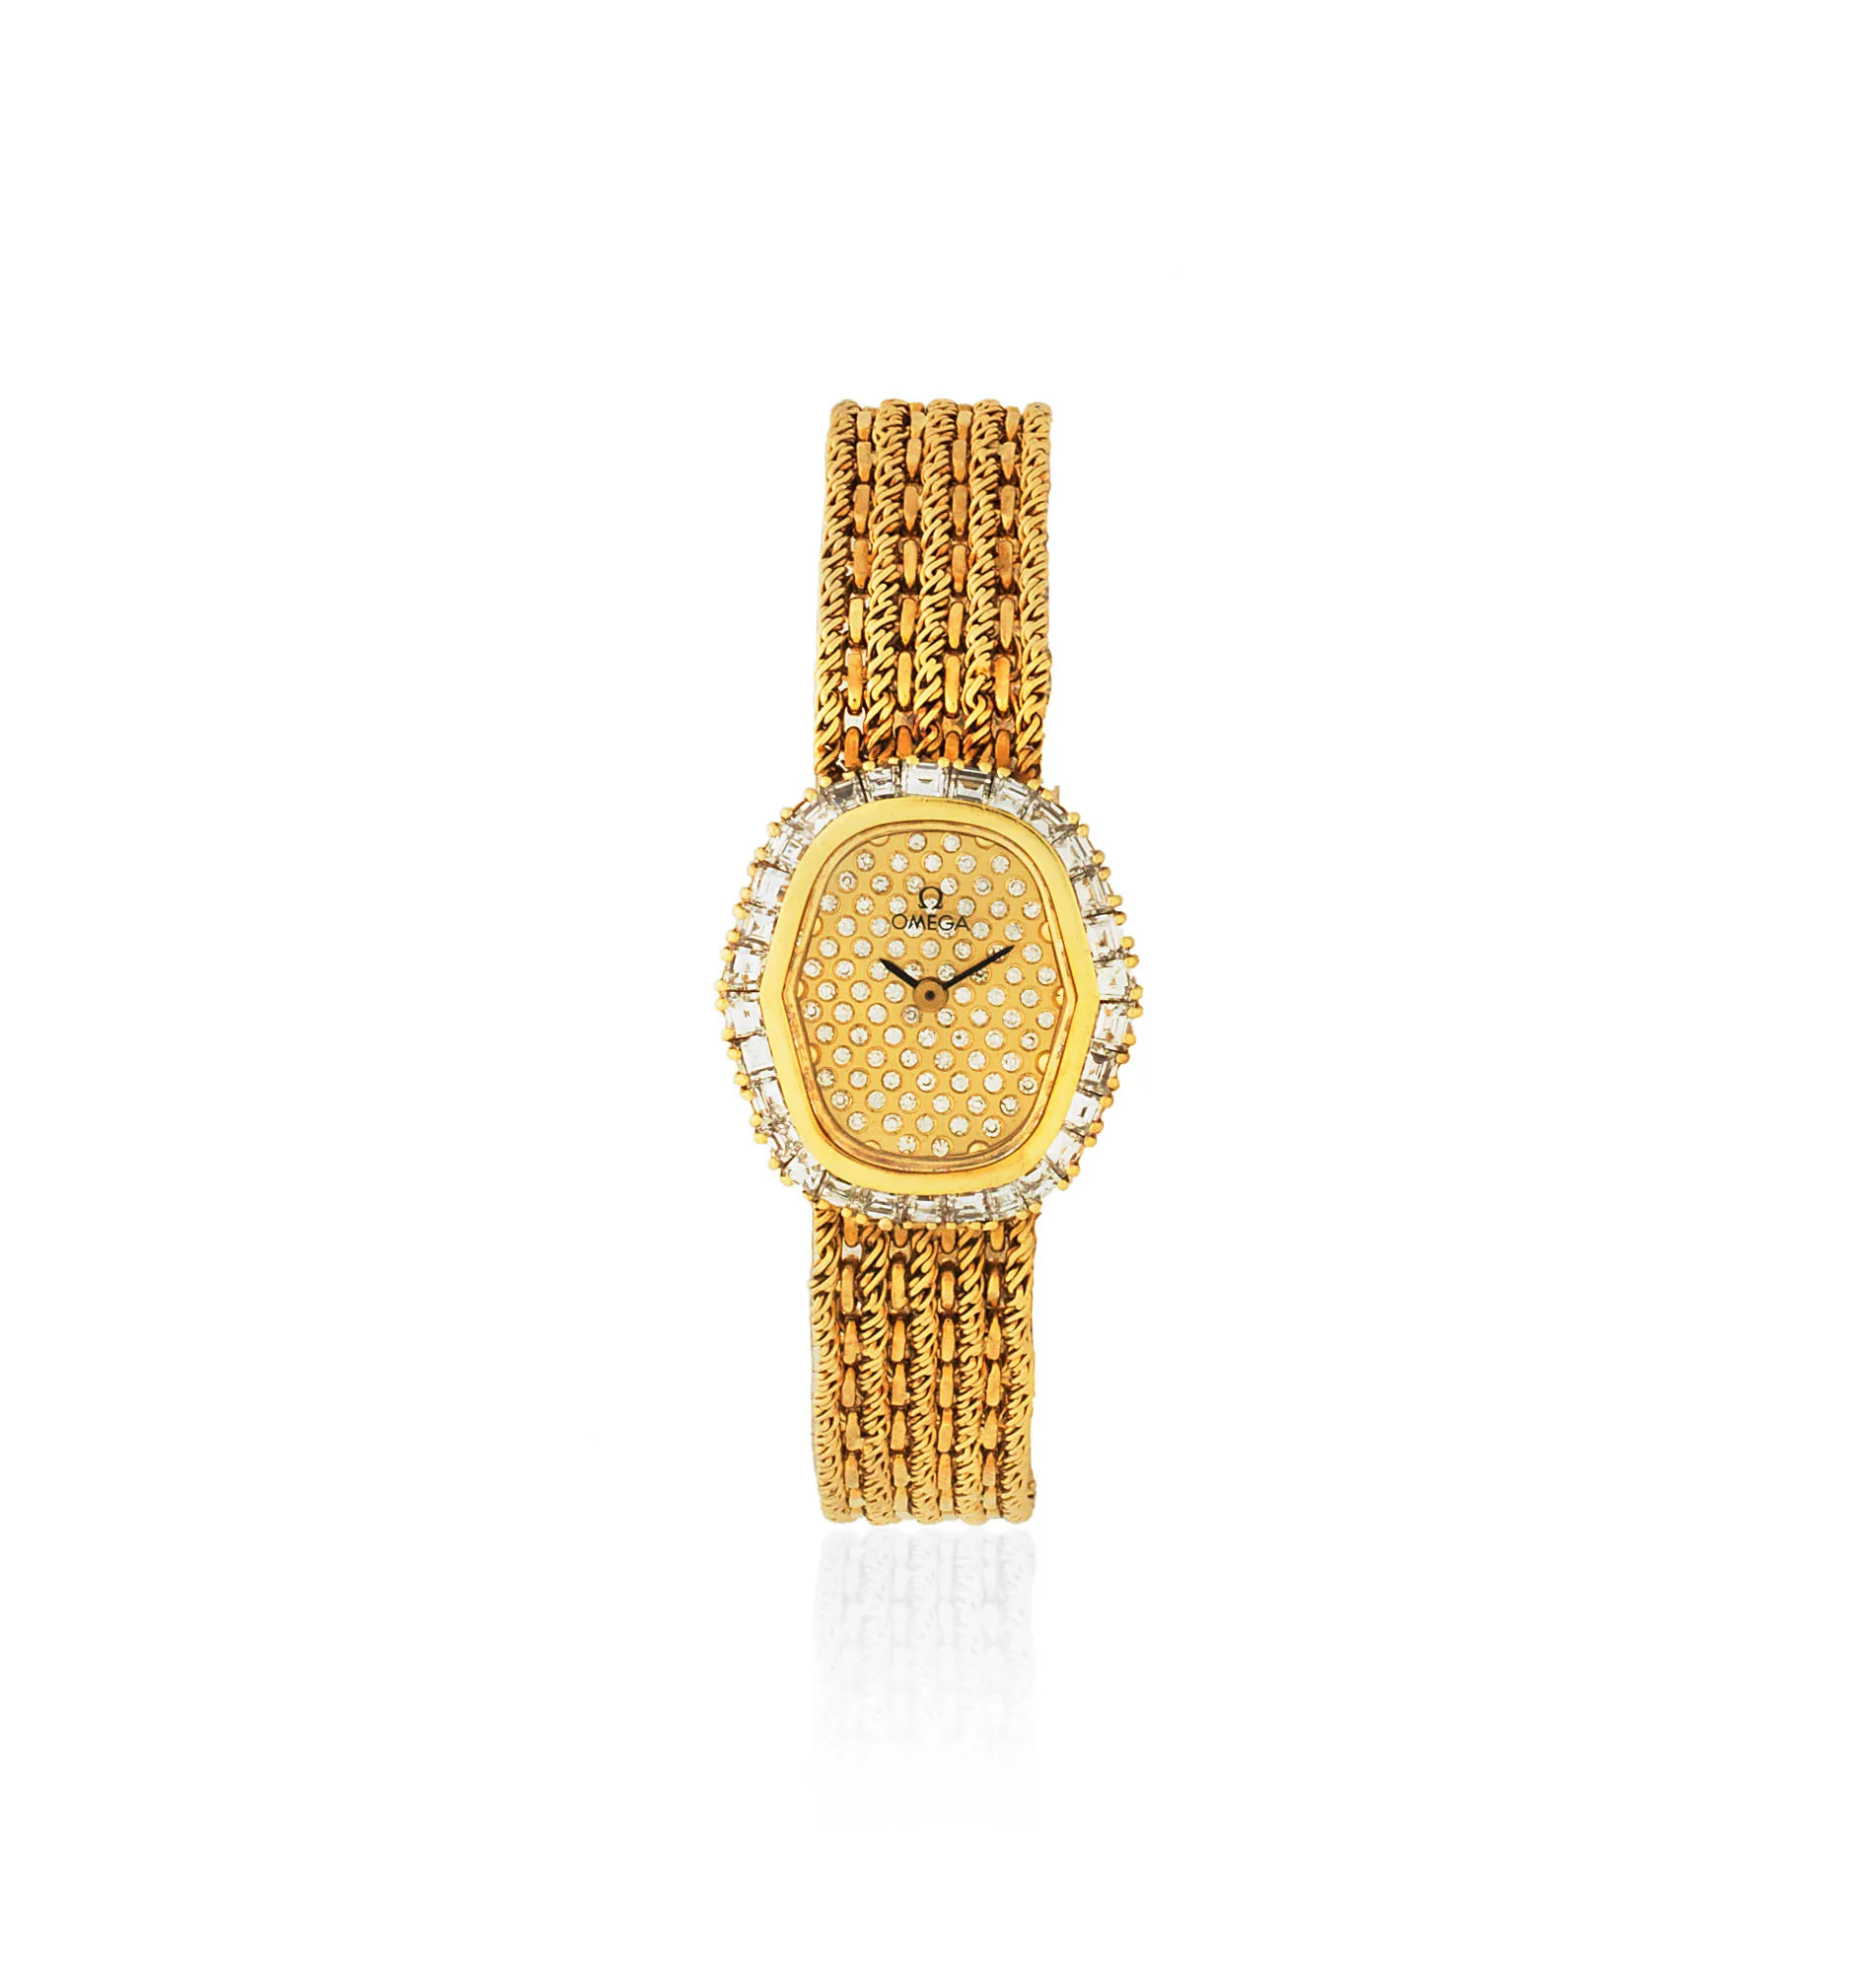 Omega 1450 22mm Yellow gold Champagne